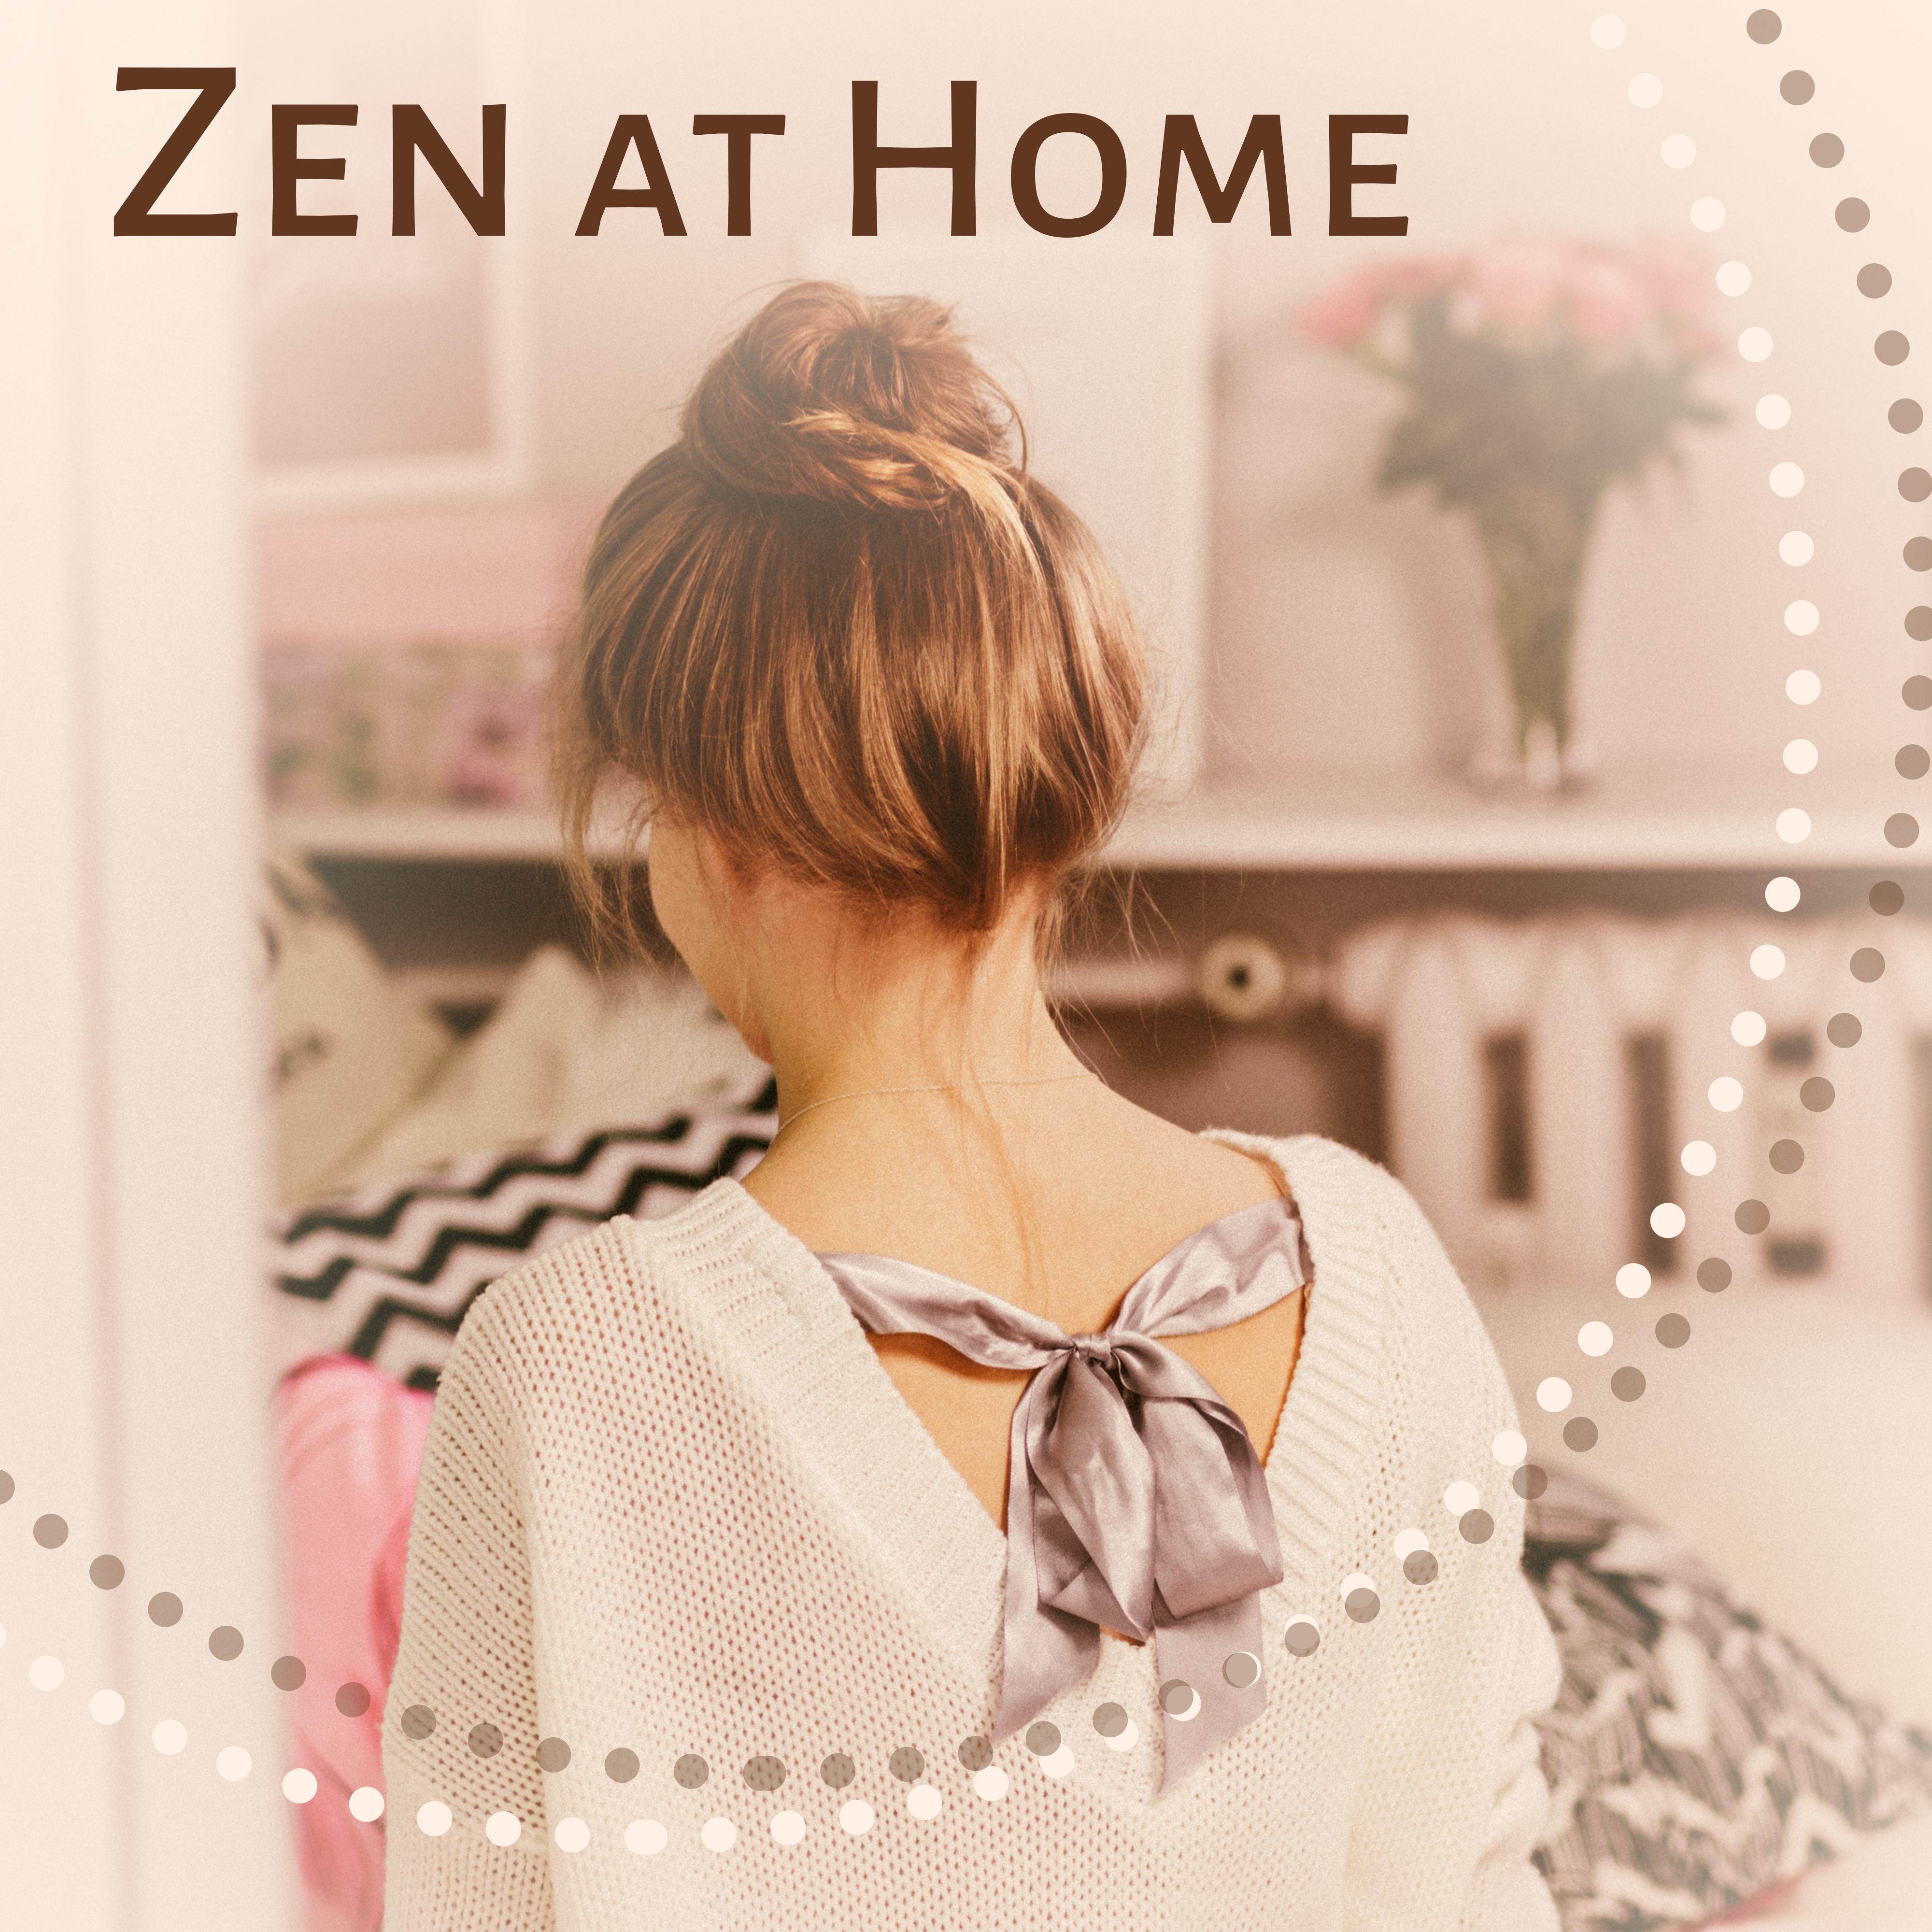 Zen at Home – Calming New Age Music, Yoga at Home, Rest, Deep Relaxation, Music for Meditate